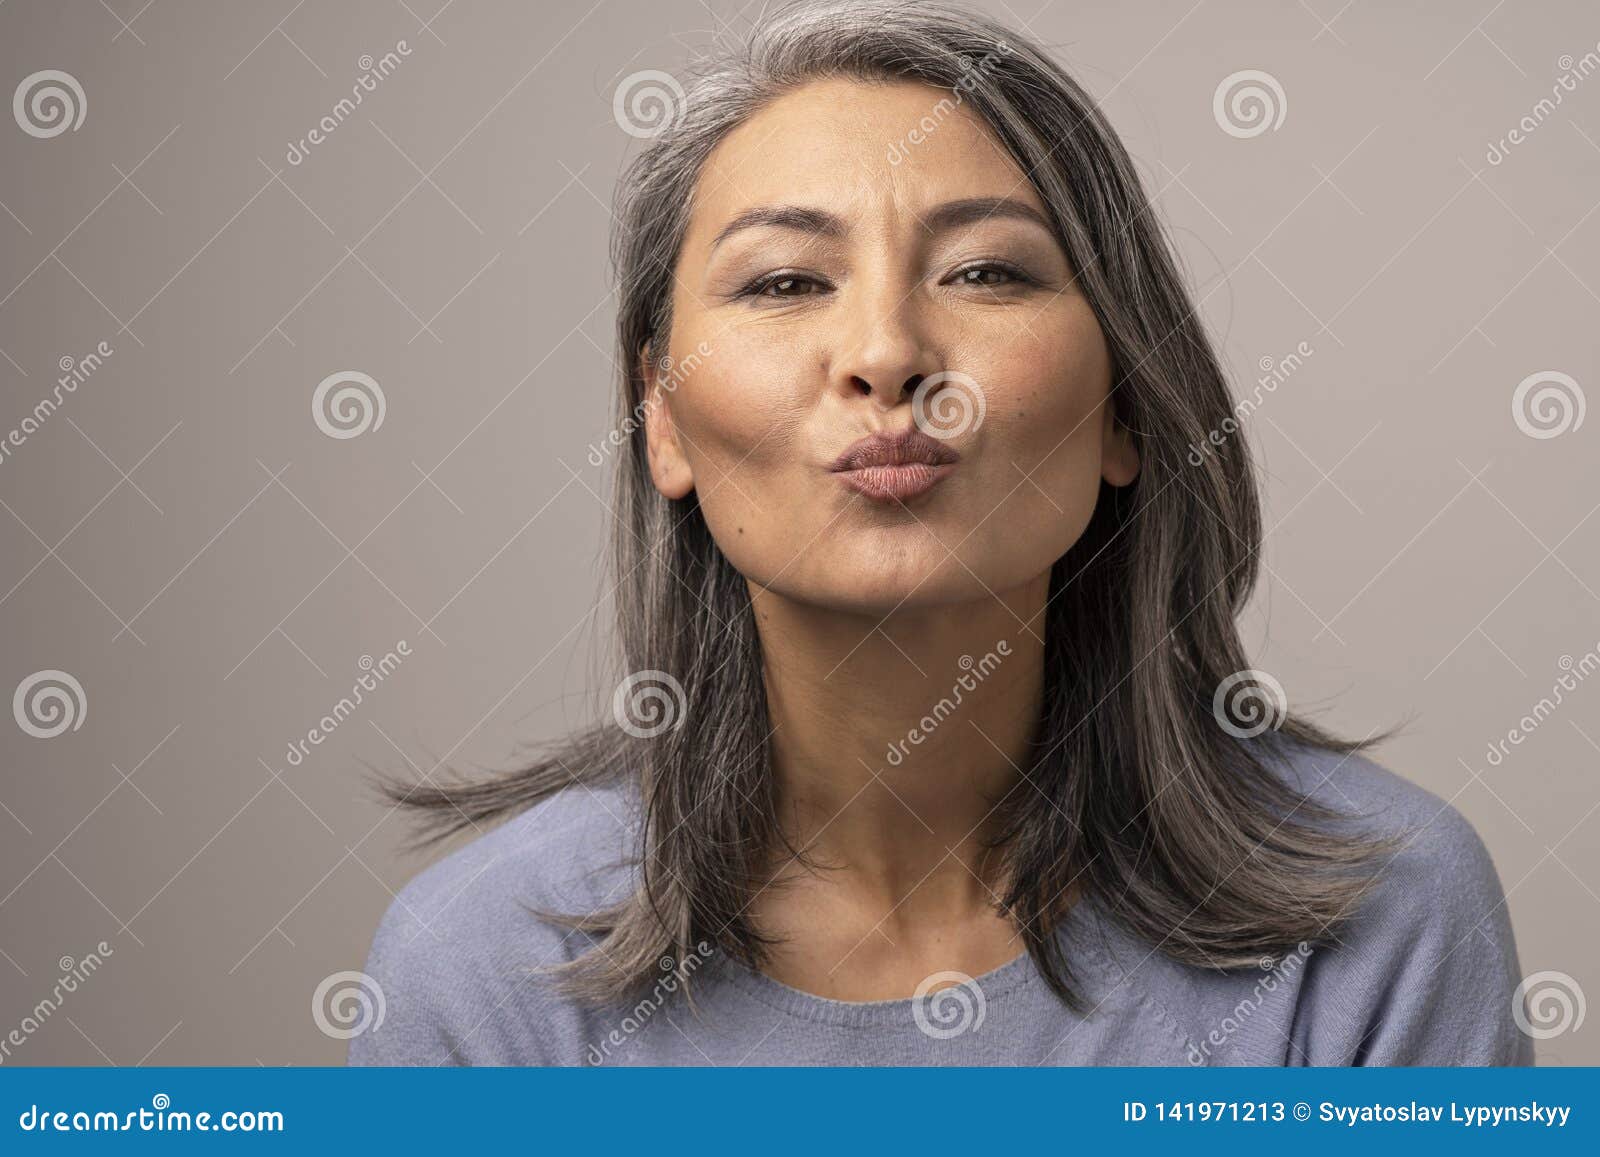 https://thumbs.dreamstime.com/z/charming-mongolian-woman-gray-hair-over-background-gently-sends-kiss-to-frame-beauty-concept-close-up-shoot-141971213.jpg